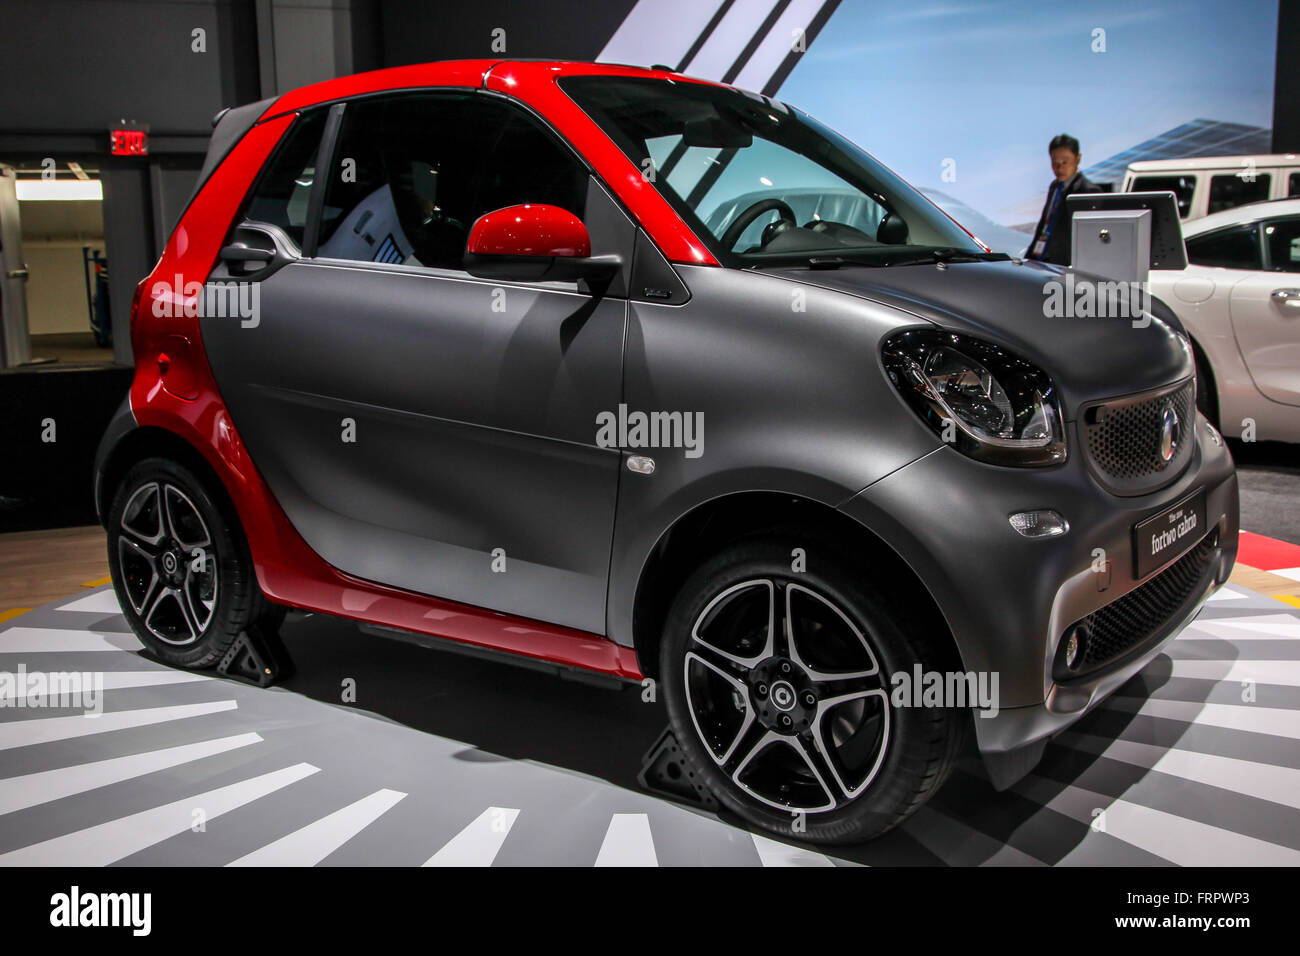 New York, NY, USA - 23 March 2016. A Mercedes Smart Fortwo cabrio shown at  the New York International Auto Show Credit: Miro Vrlik Photography /Alamy  Live News Stock Photo - Alamy